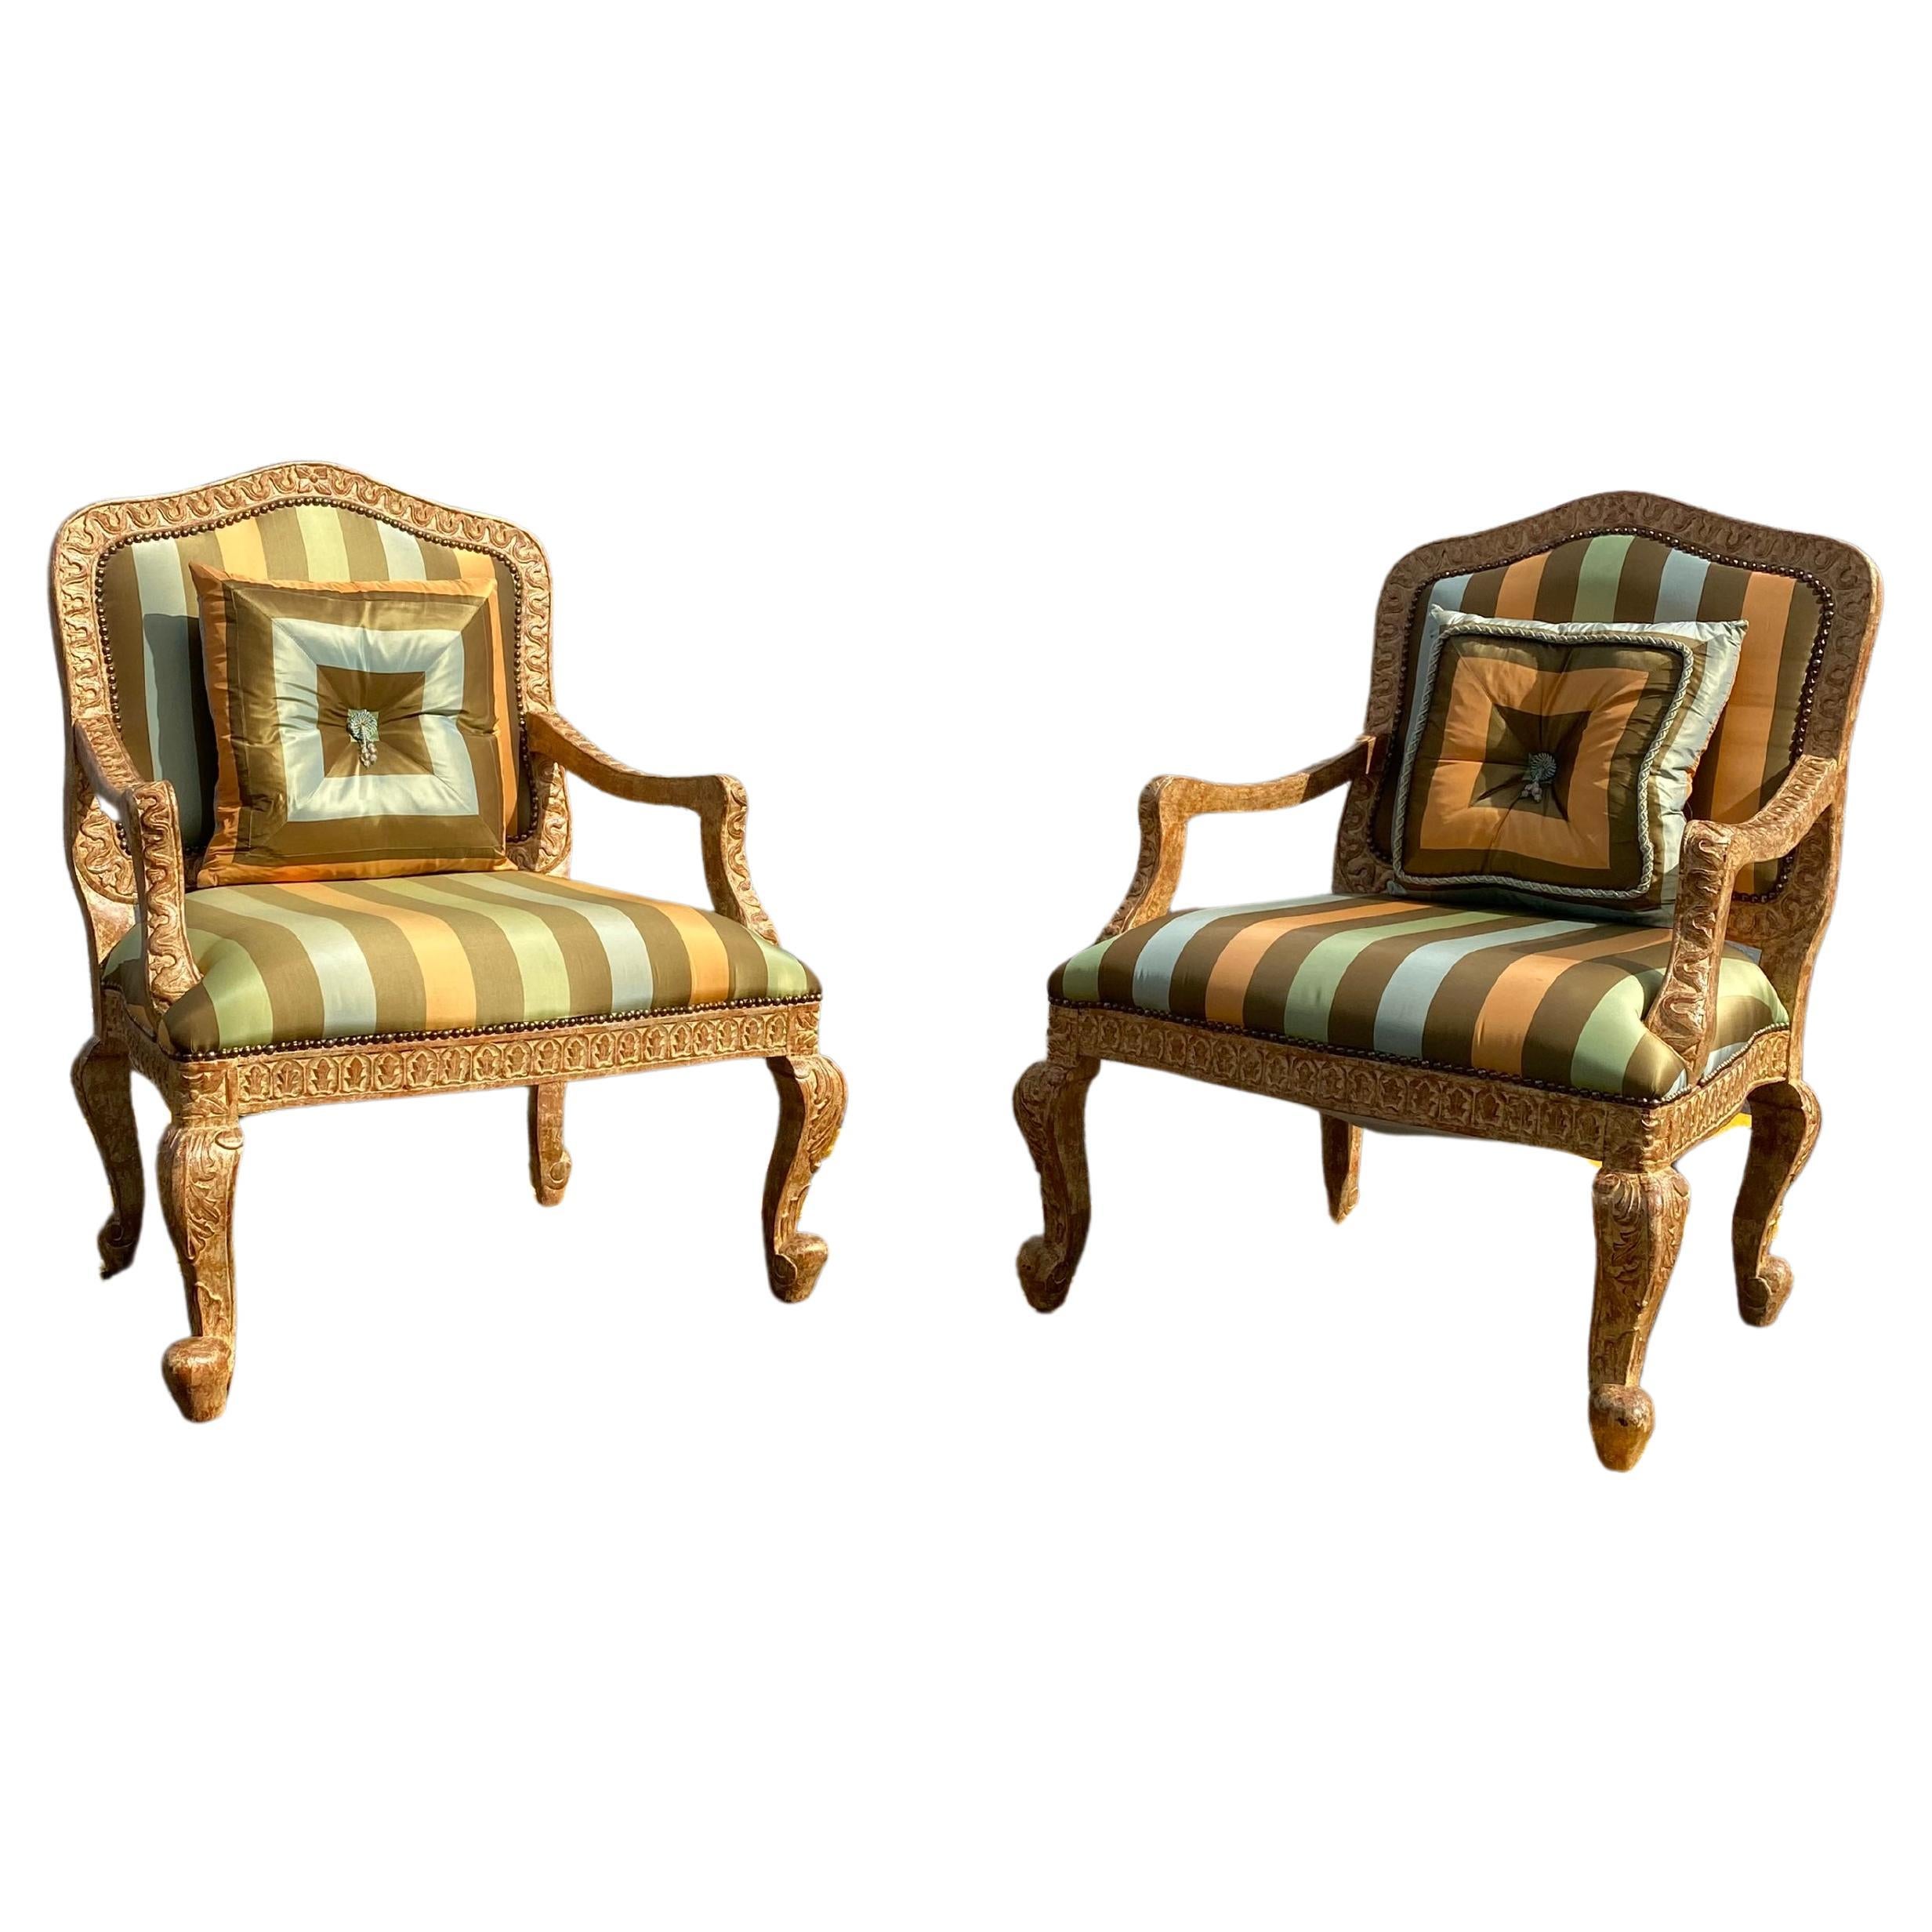 1930s French Carved Gilt Wood Striped Bergere Library Chairs, Set of 2 For Sale